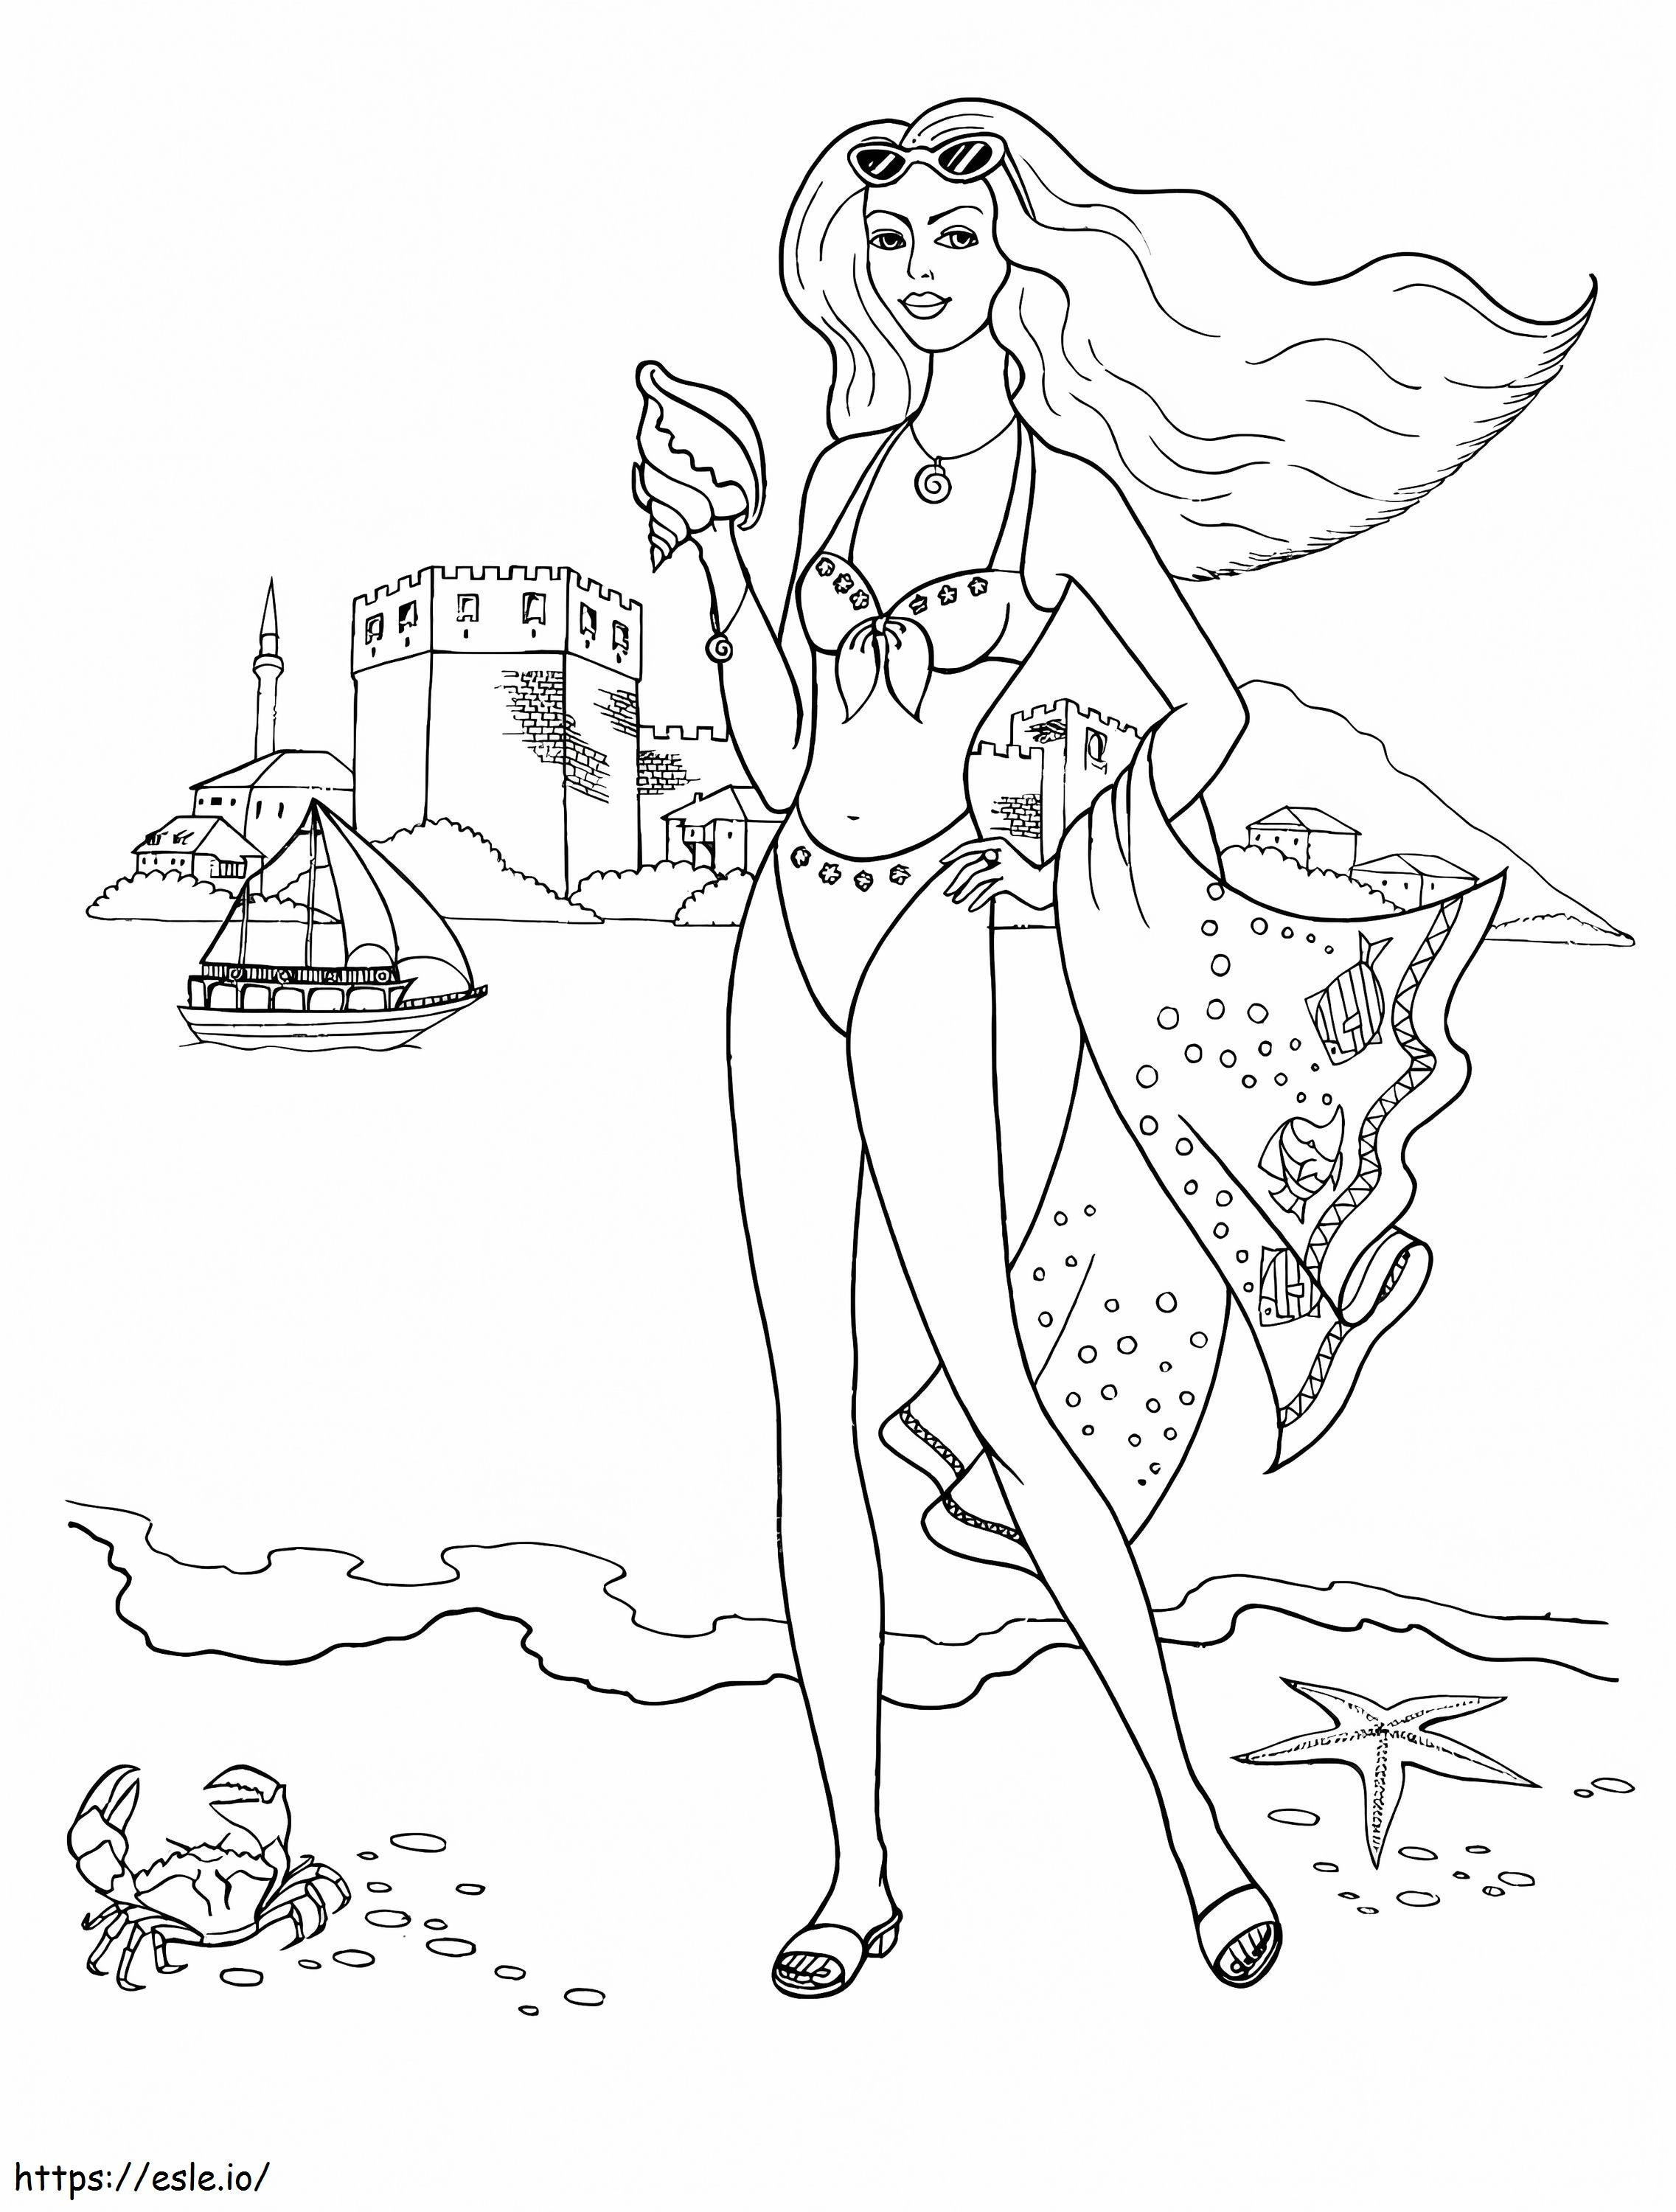 Teenage Girl On The Beach coloring page